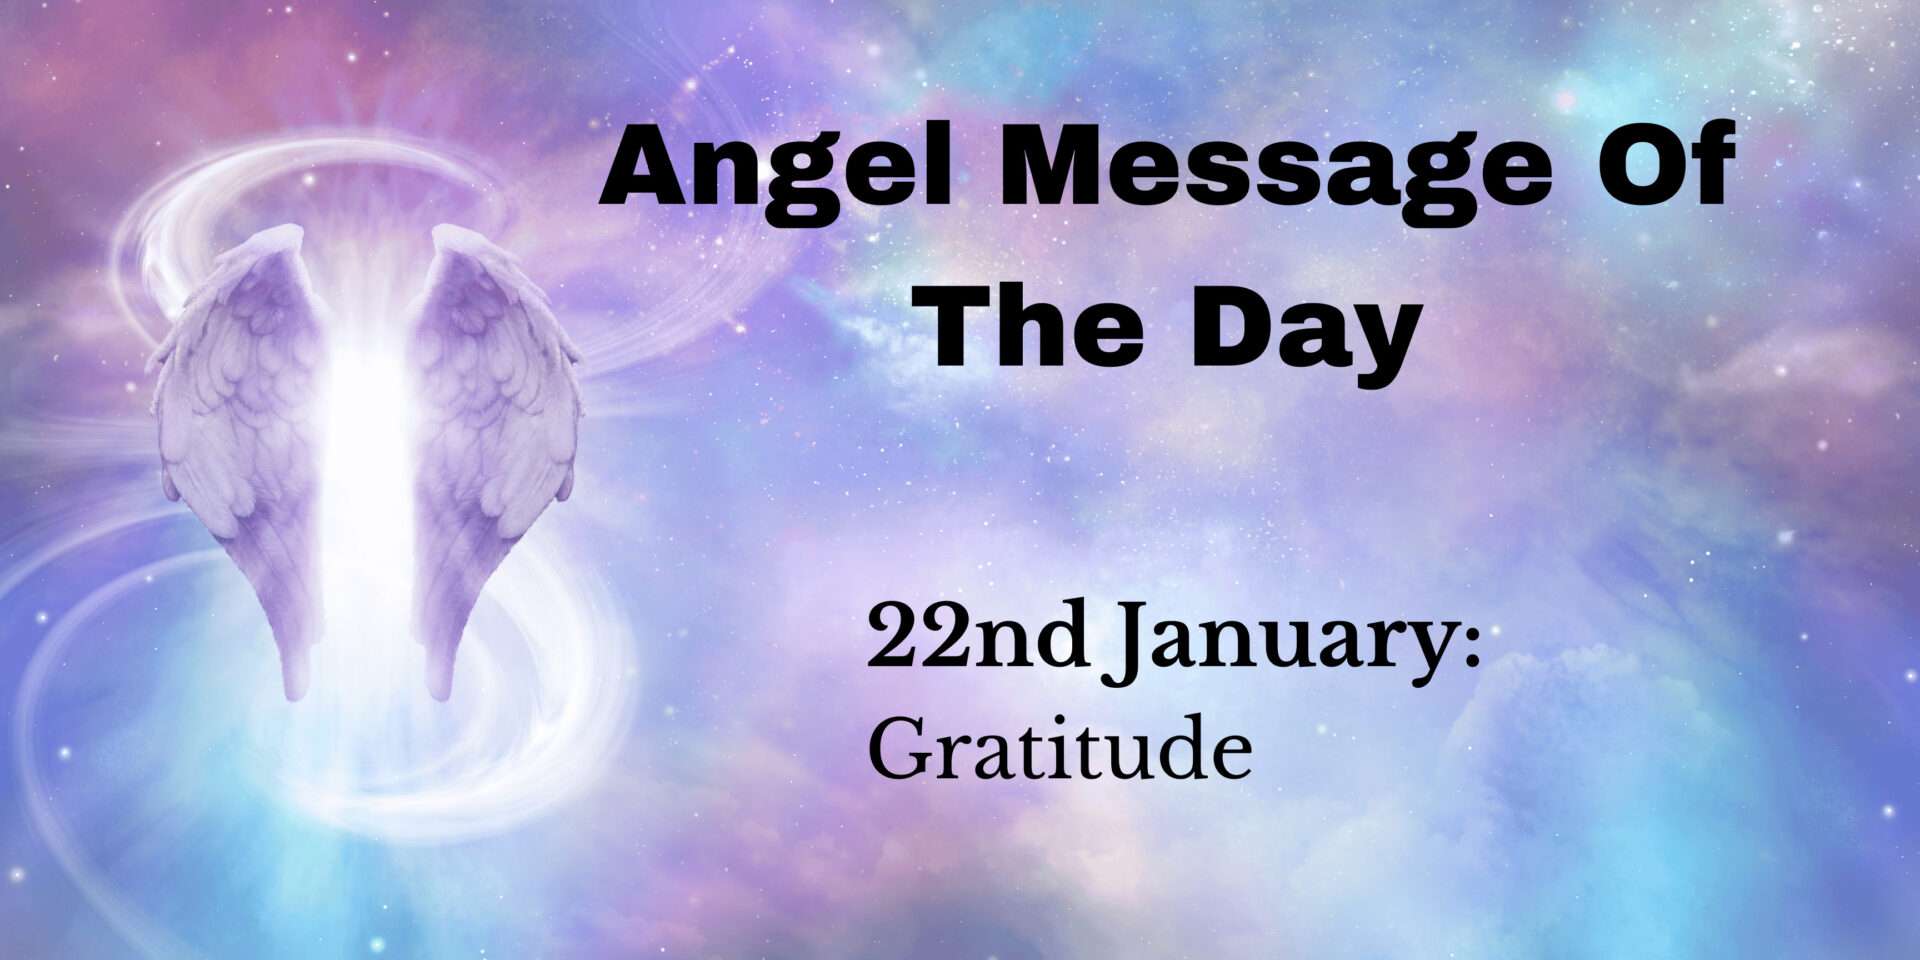 angel message of the day : gratitude